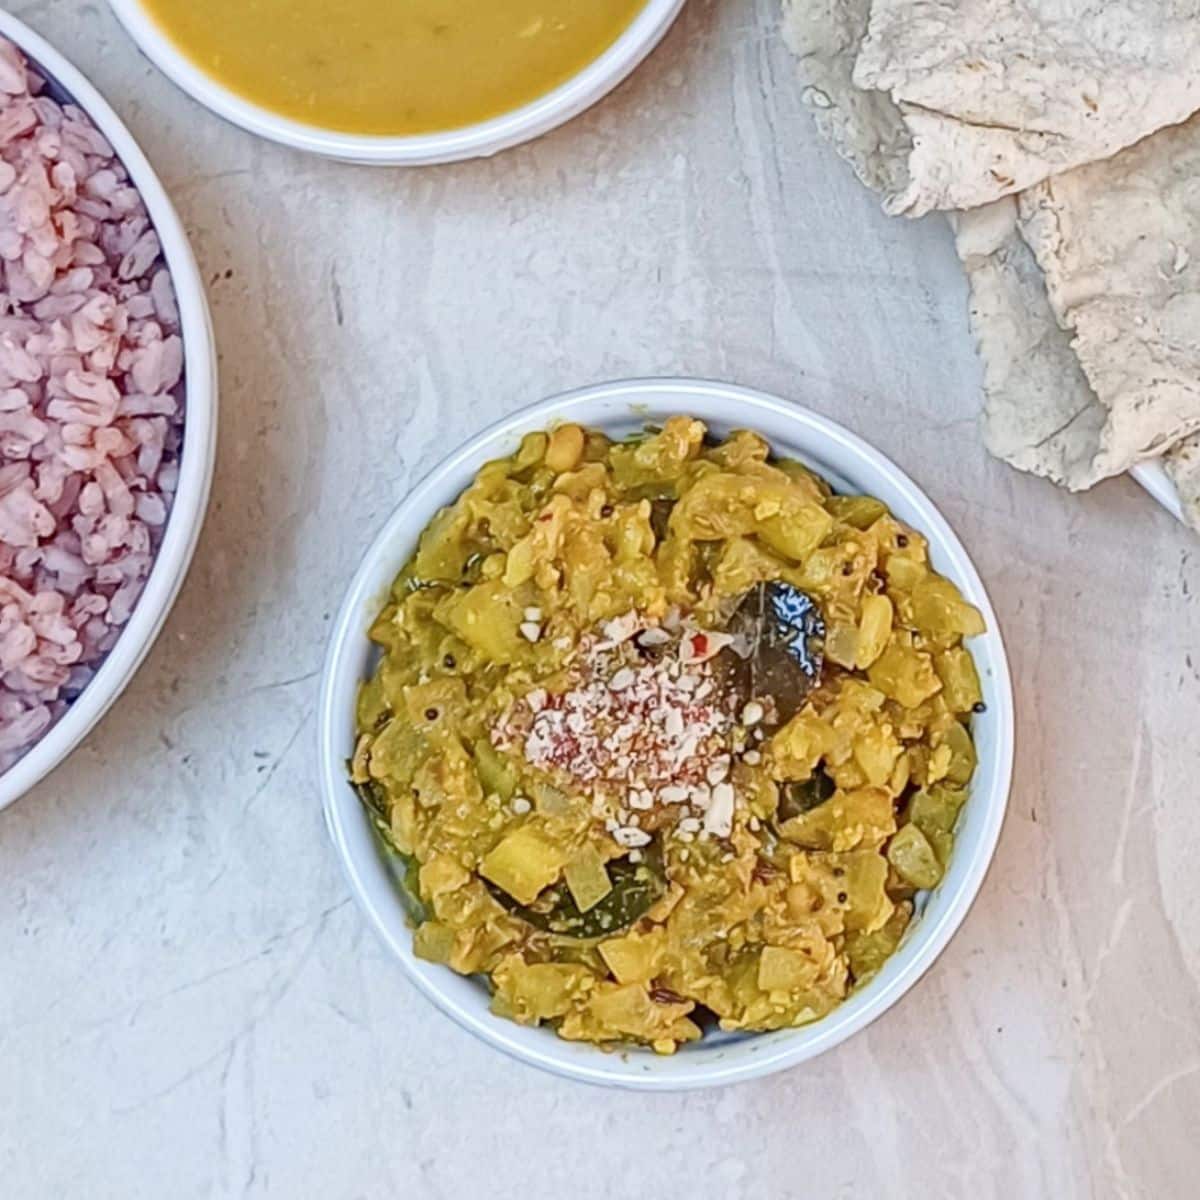 lauki ki sabji in a white bowl placed on a tile along with a bowl of red rice, curry and rotis.